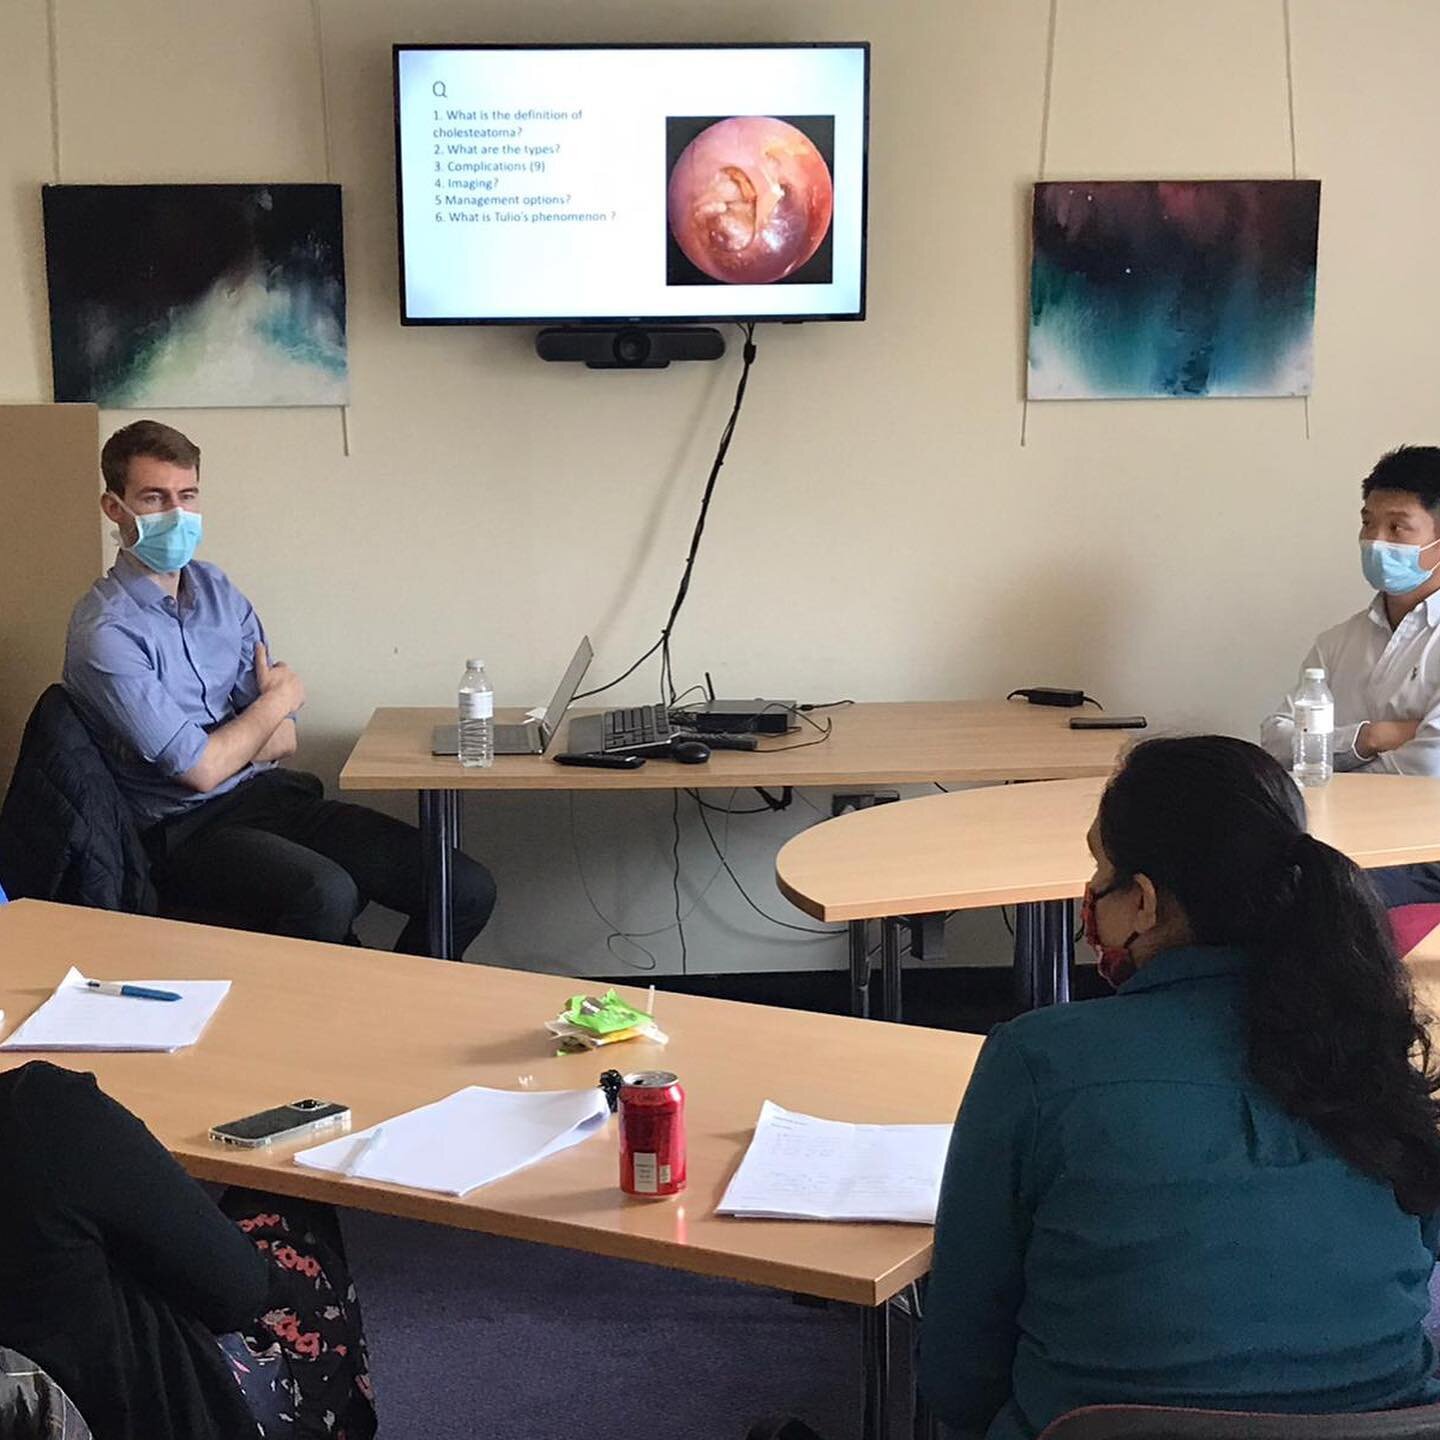 Another successful DOHNS course! Great to be able to deliver a covid secure F2F course again - Thank you to all the faculty for their efforts and for giving up their time! Good luck to all the candidates! 👍